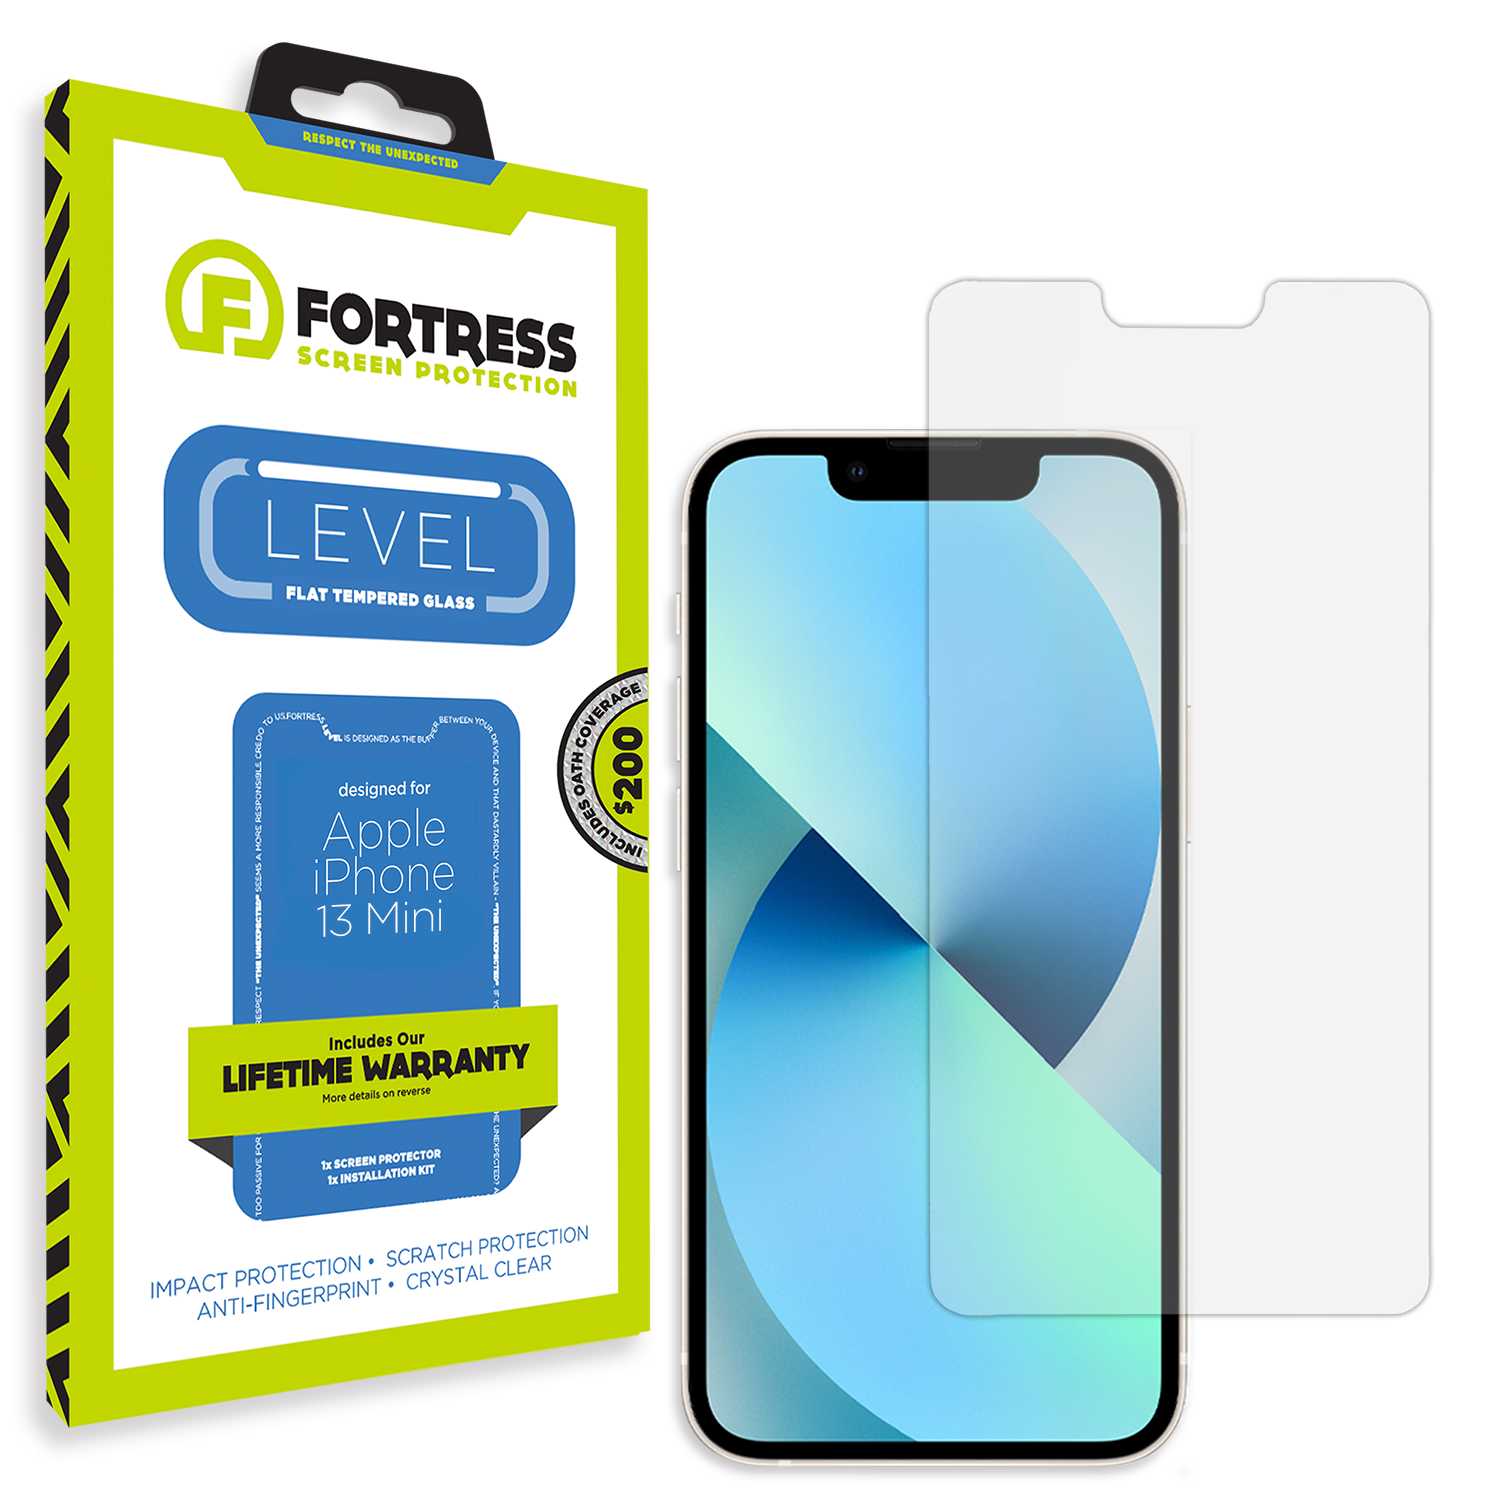 Fortress iPhone 13 Mini Screen Protector $200Coverage Scooch Screen Protector